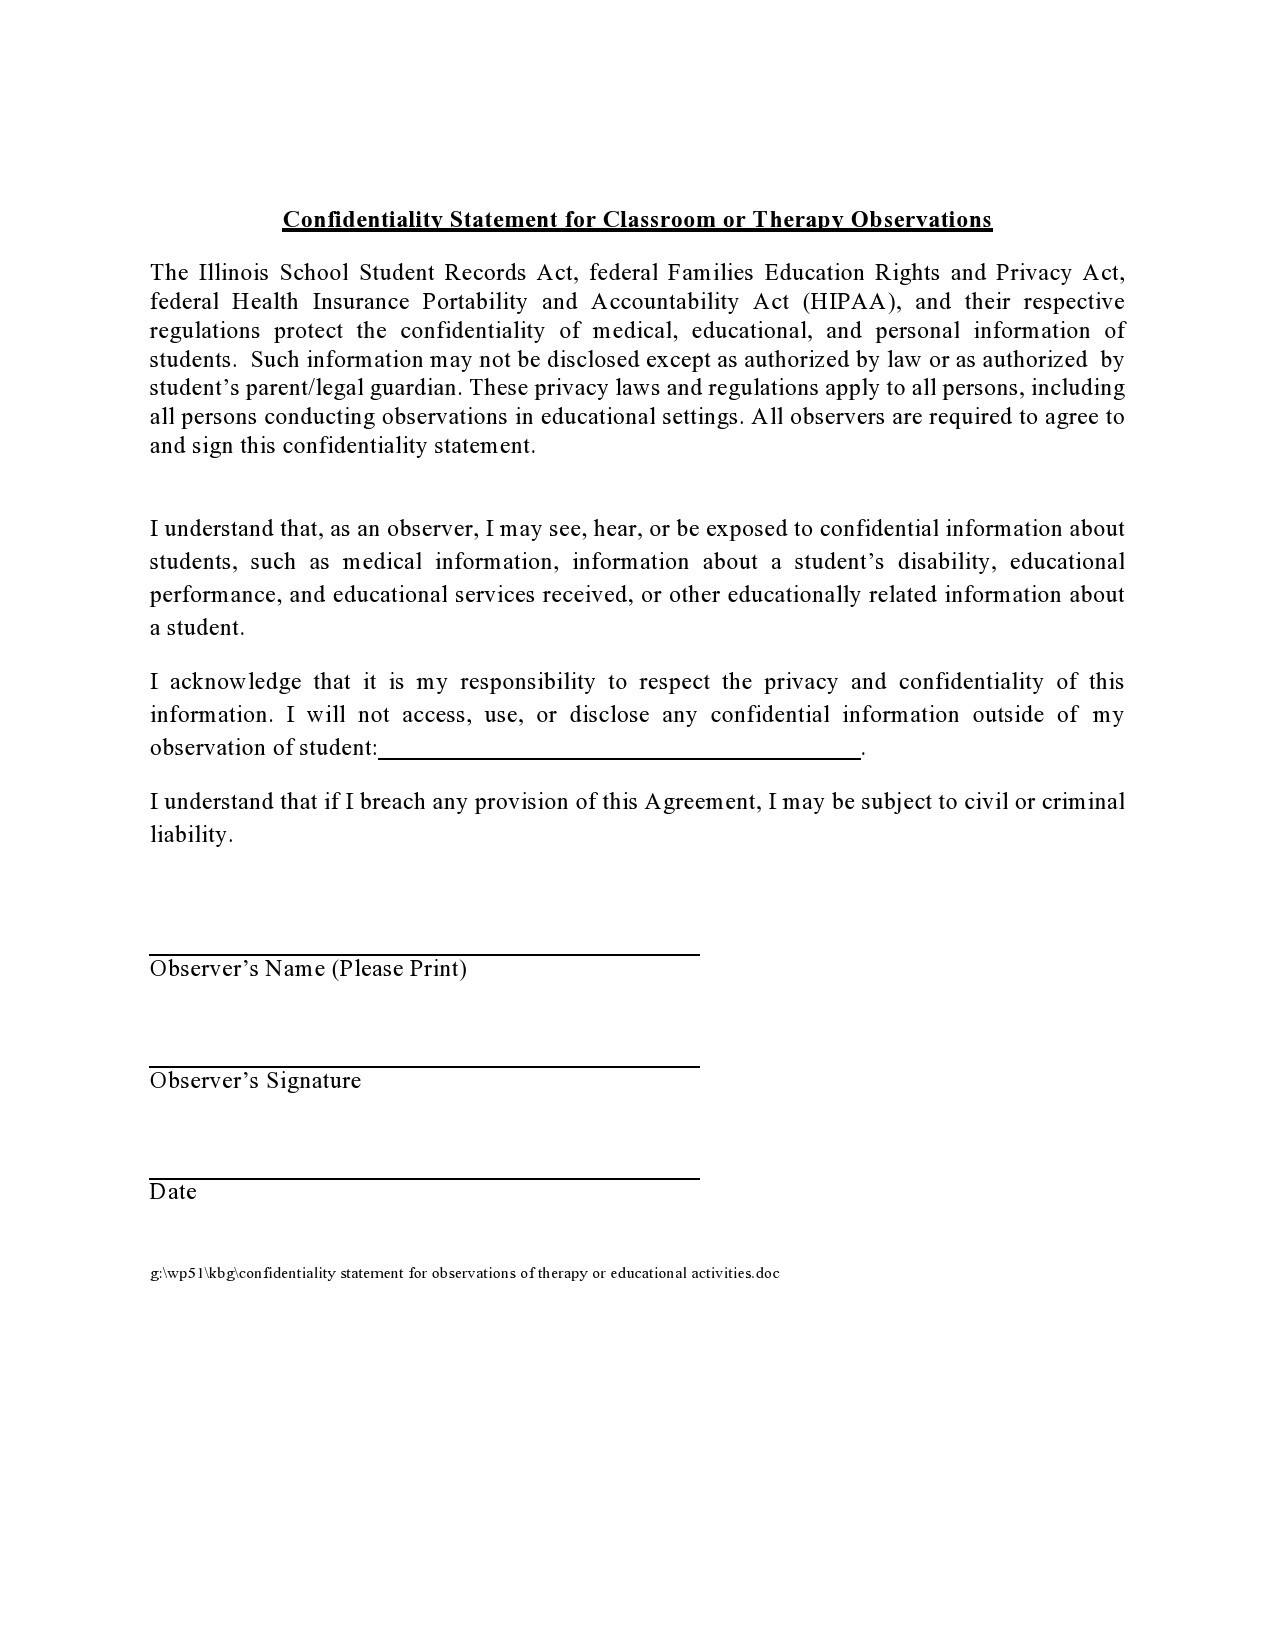 Free confidentiality statement 23